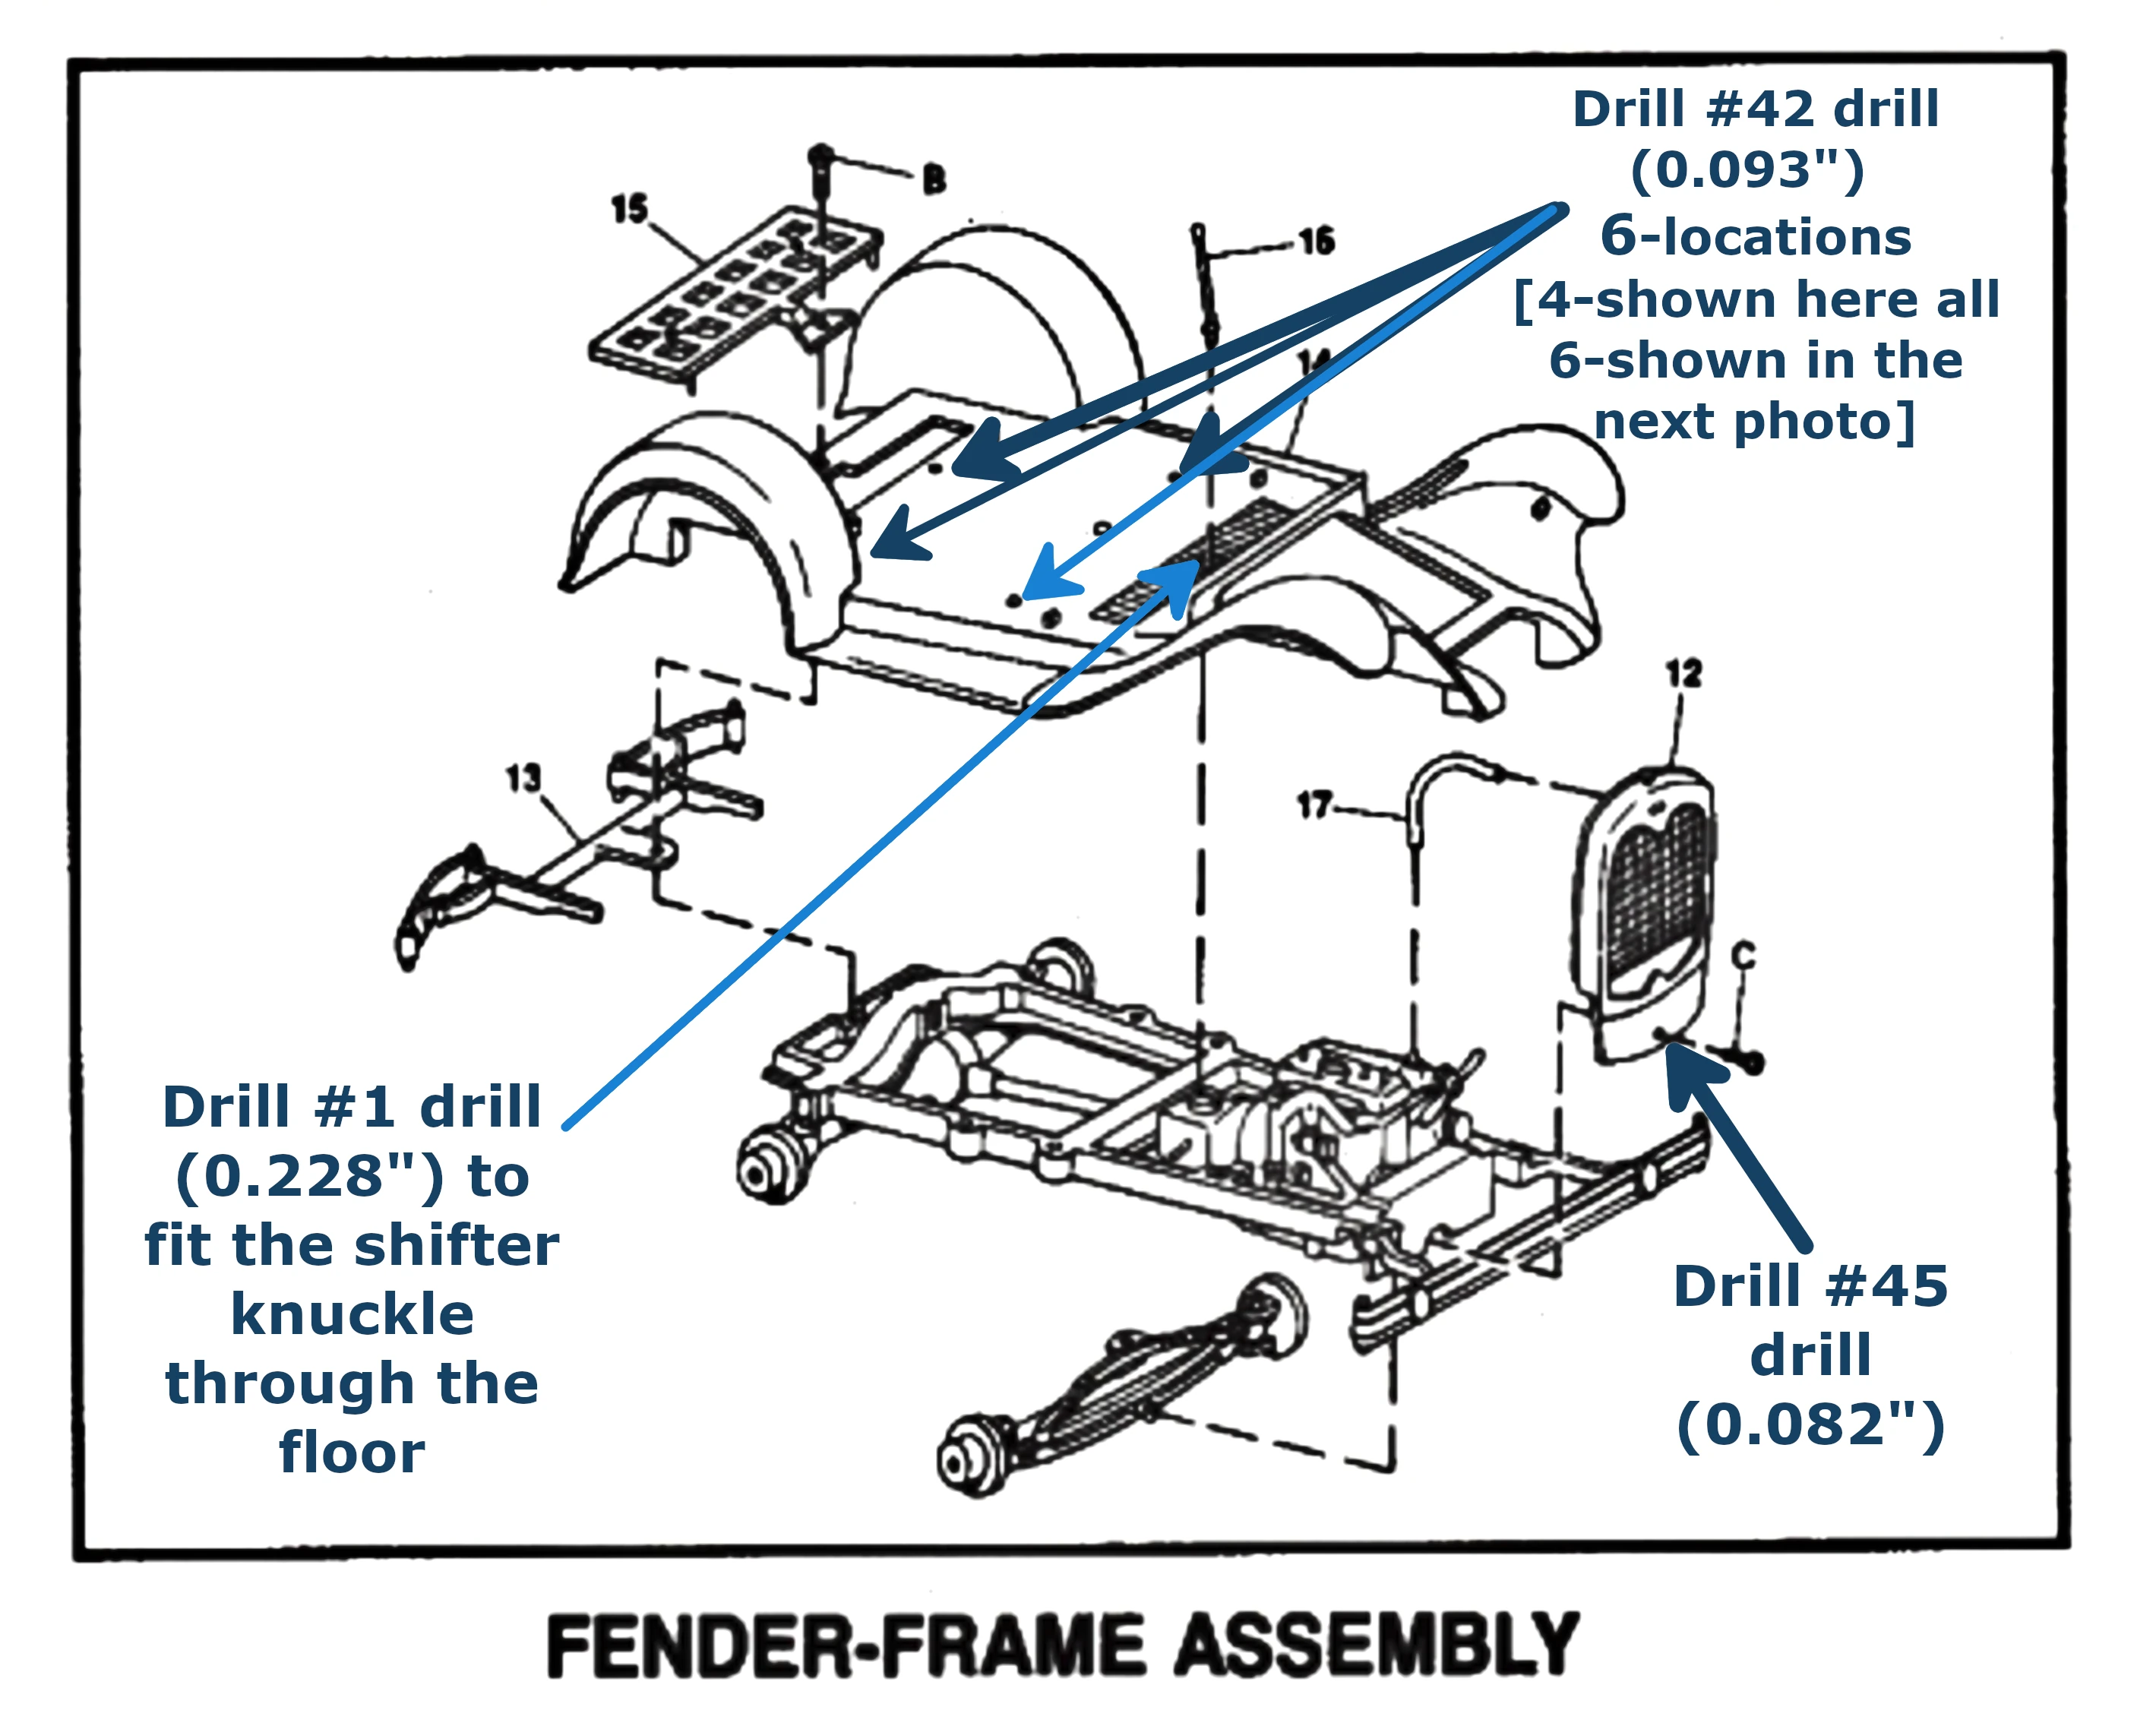 Fender-Frame assembly diagram marking drill locations and size